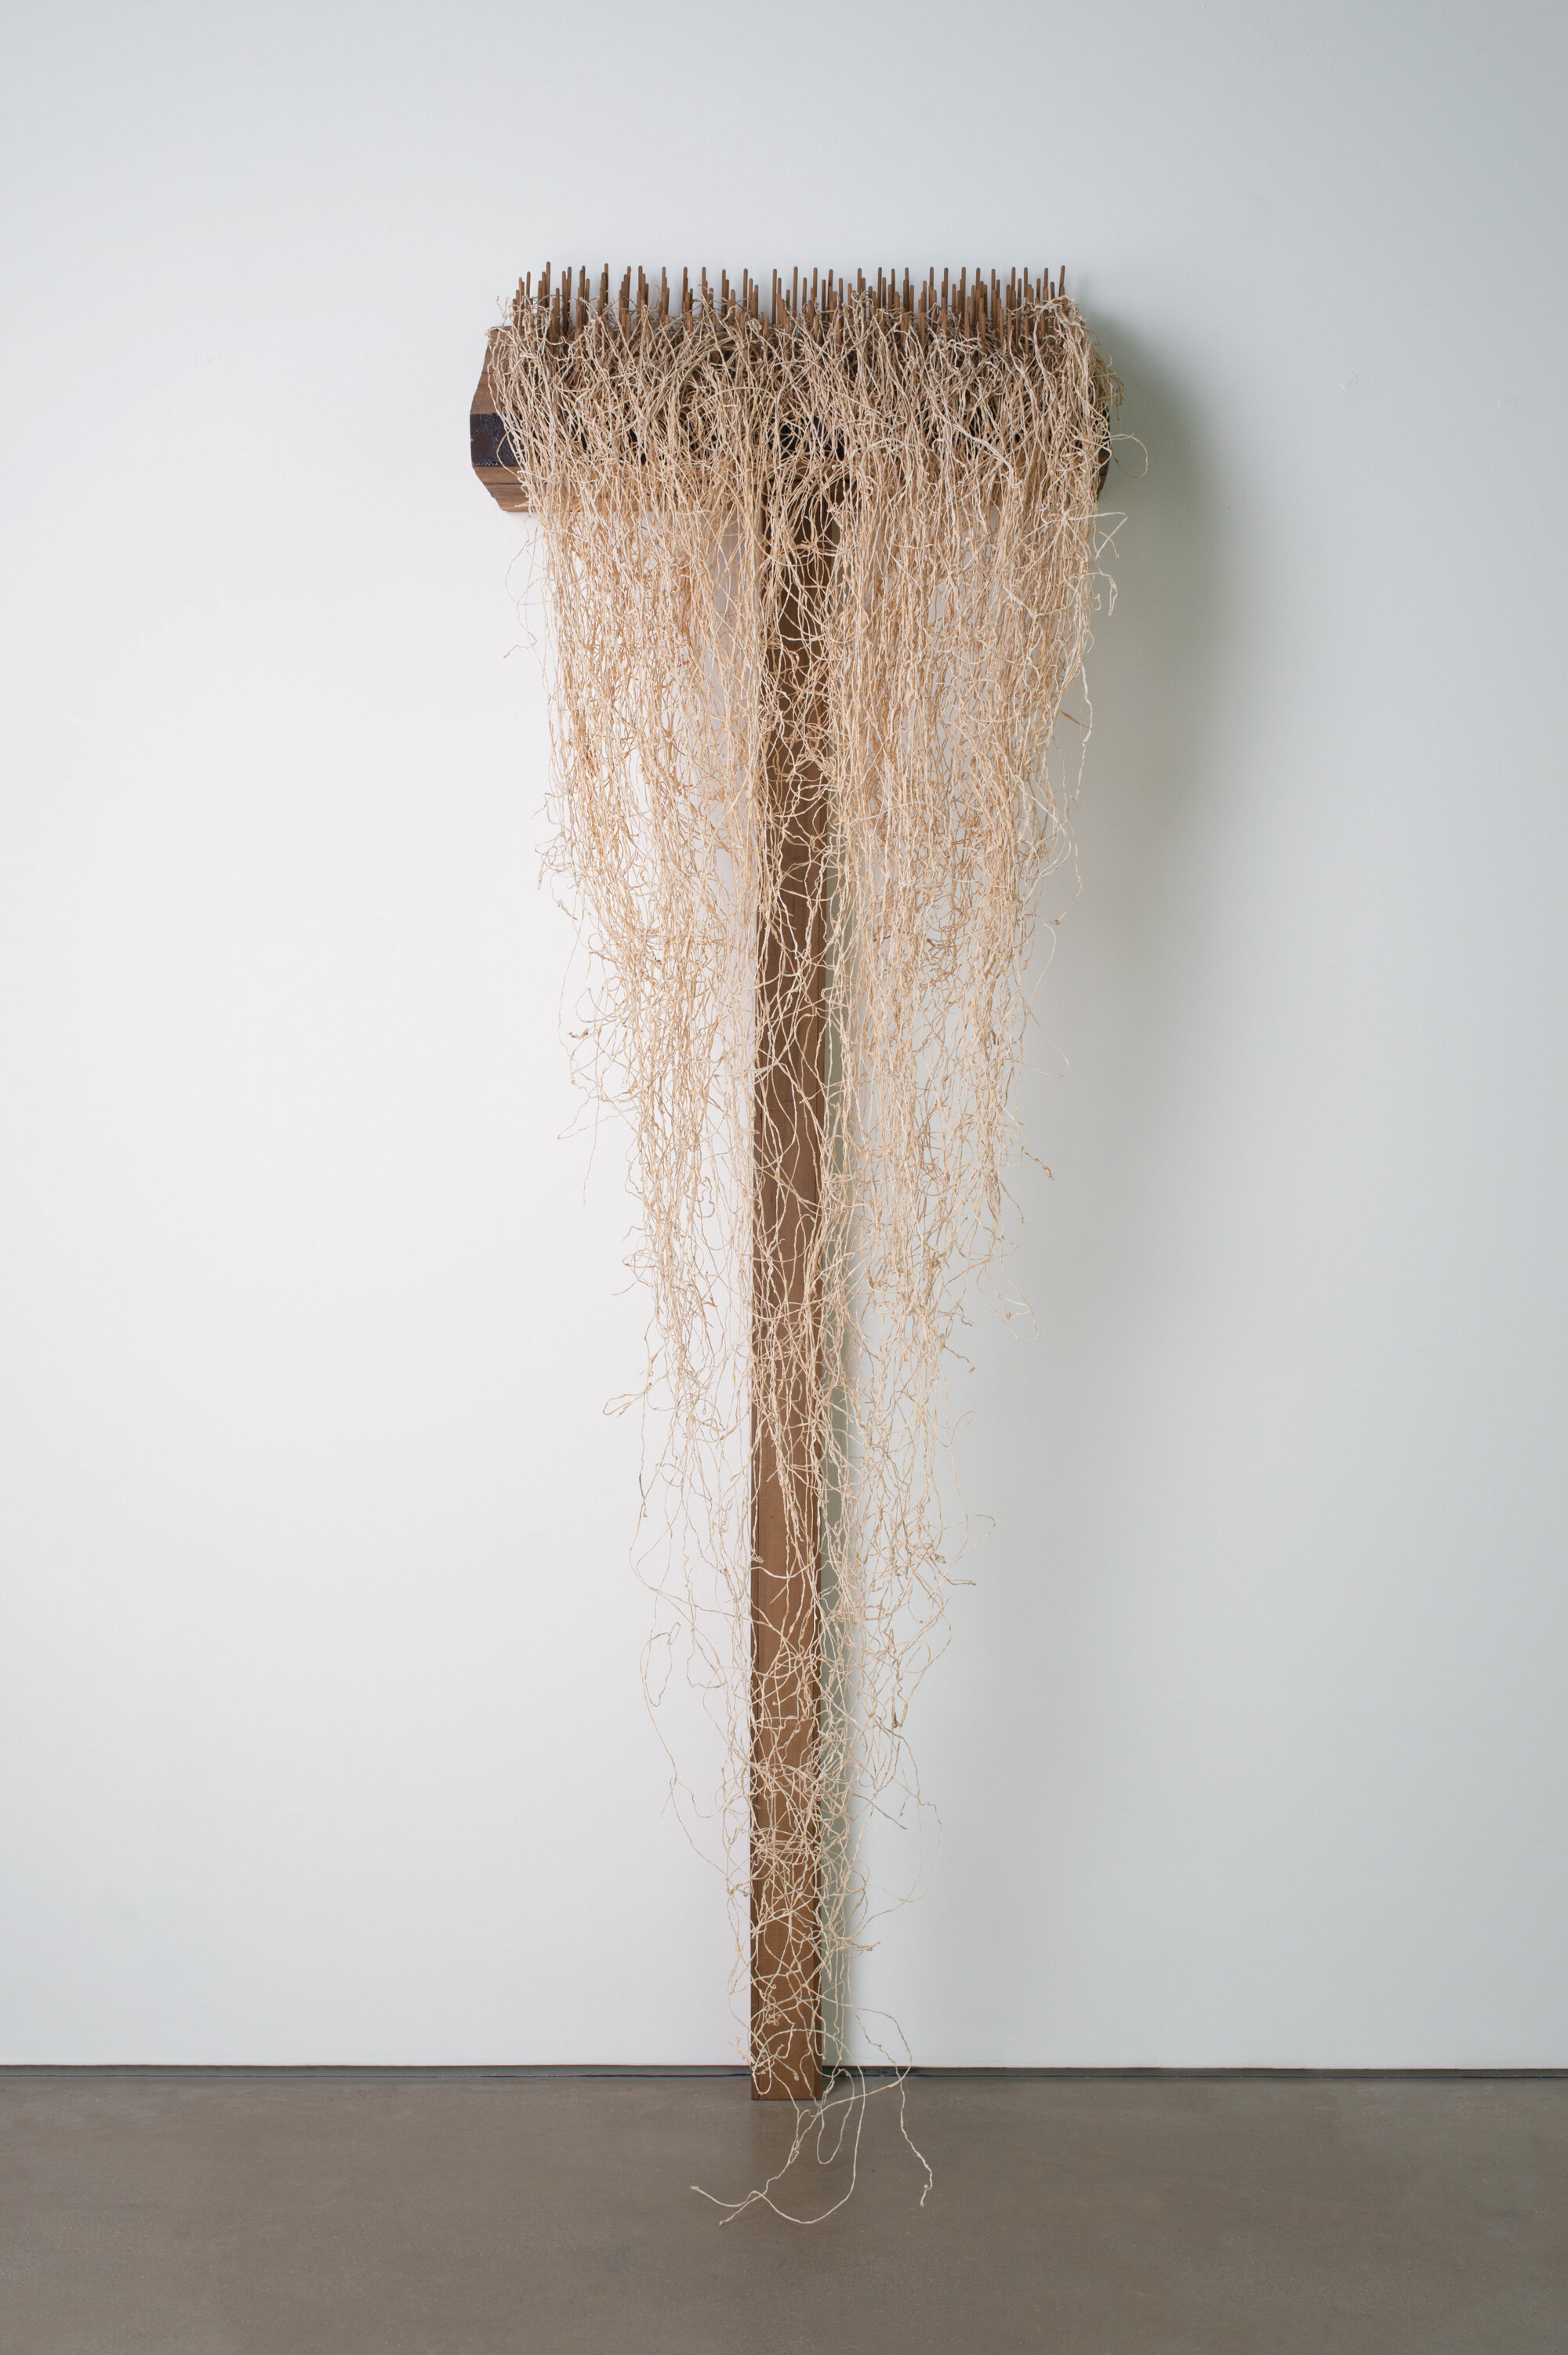       untitled (brush) , 2000 Cedar and pig intestines 116 x 29 x 11 in.    MORE IMAGES   Yorkshire Sculpture Park   Galerie Lelong &amp; Co.  